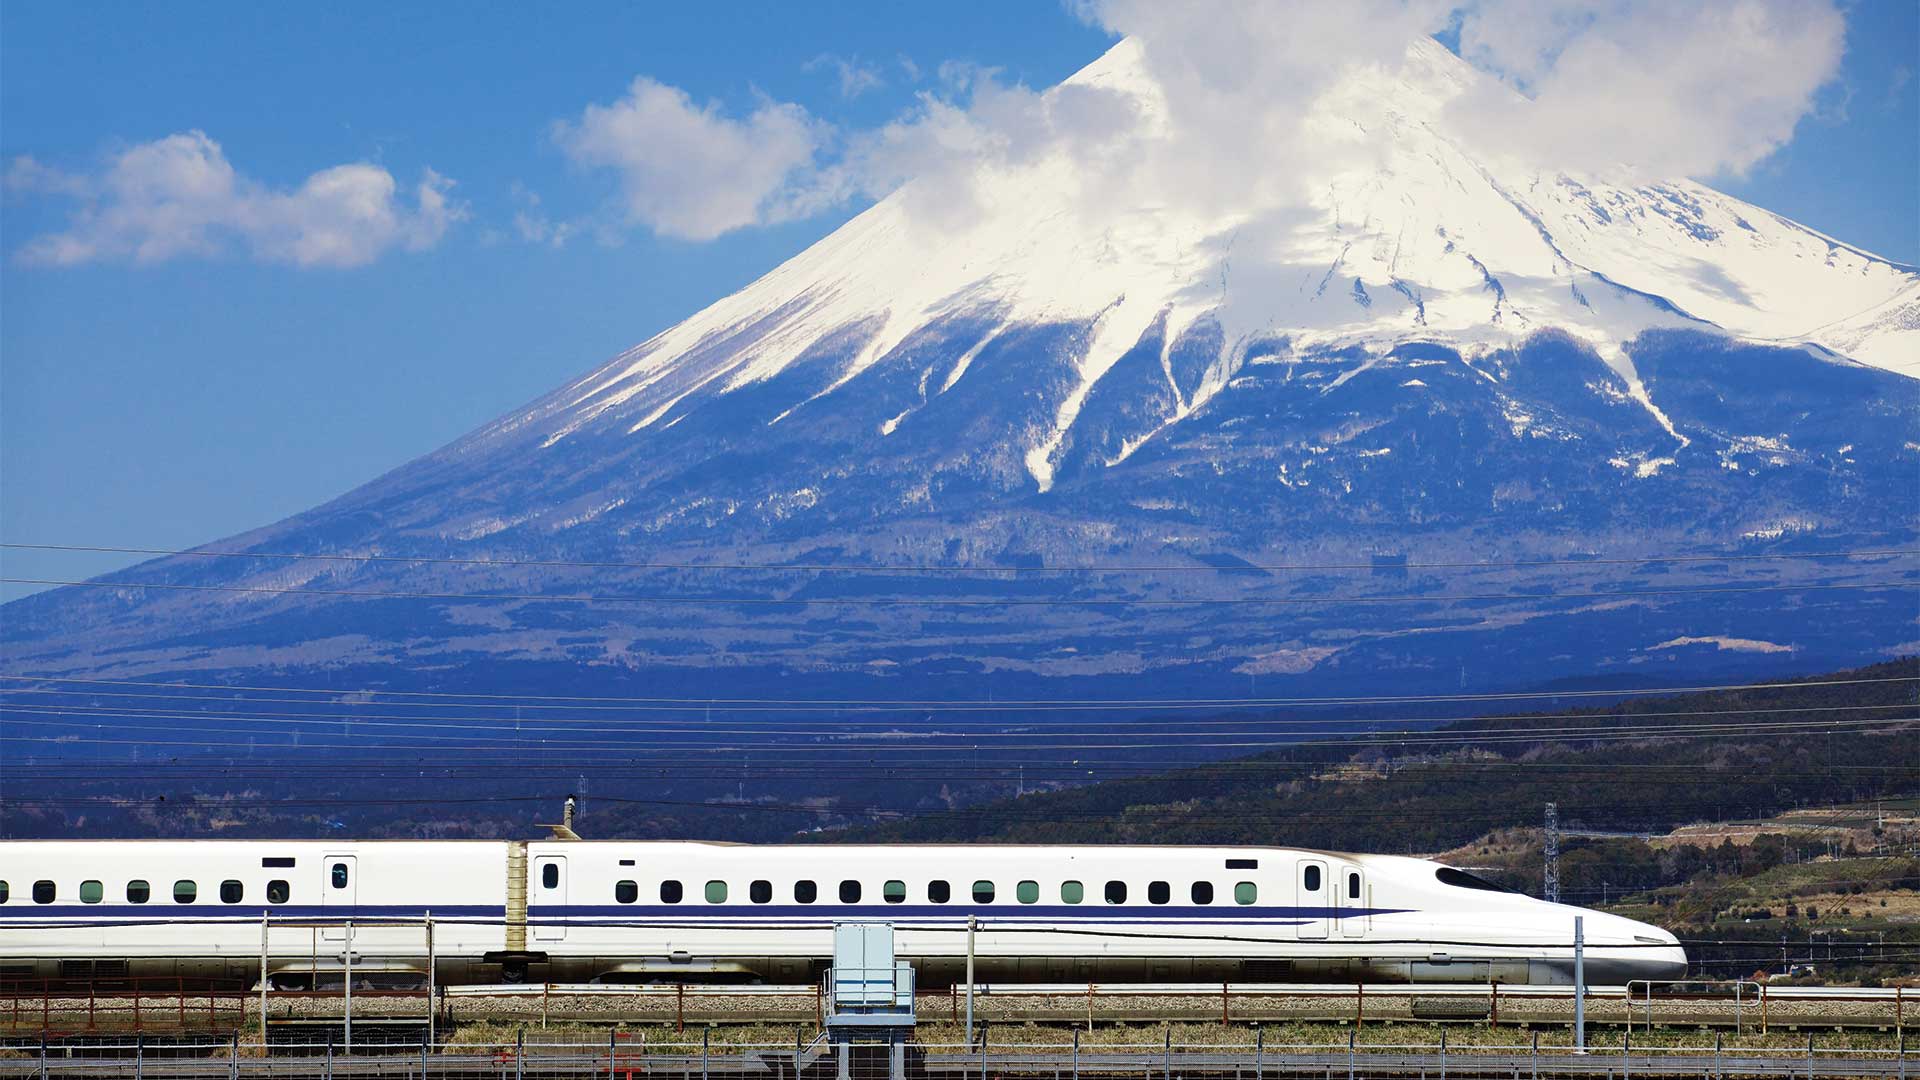 View of Mount Fuji with train in the foreground